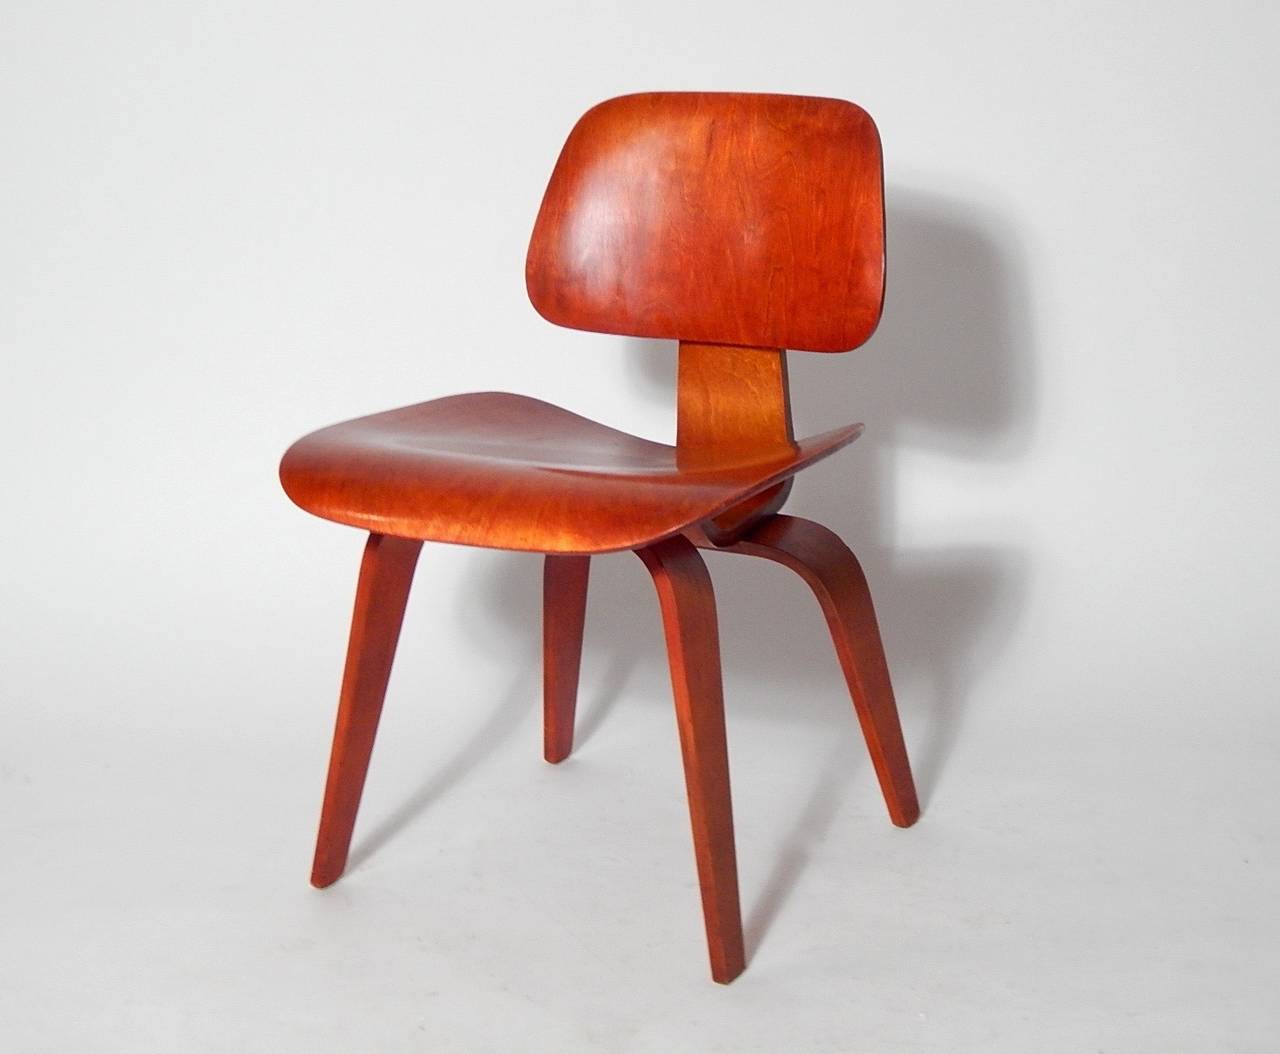 A very strong example of the early Eames design for Herman Miller, the classic DCM - in birch plywood with the less common Red Aniline, oval back shock mount, 1950s.

Marked on seat bottom with model number 1051